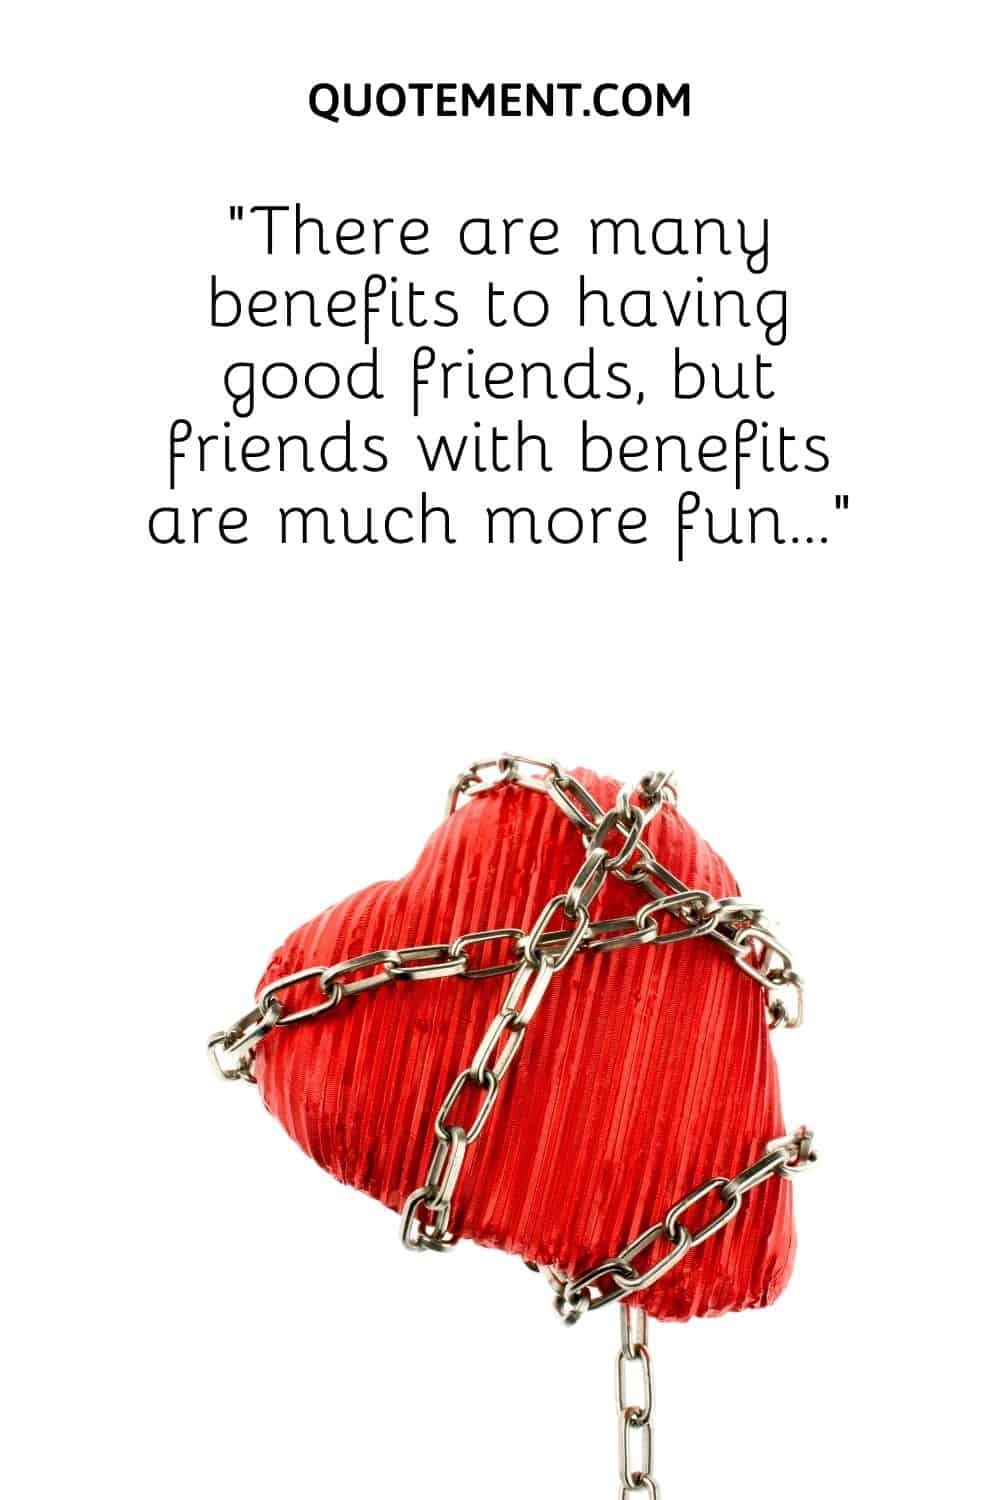 “There are many benefits to having good friends, but friends with benefits are much more fun…”